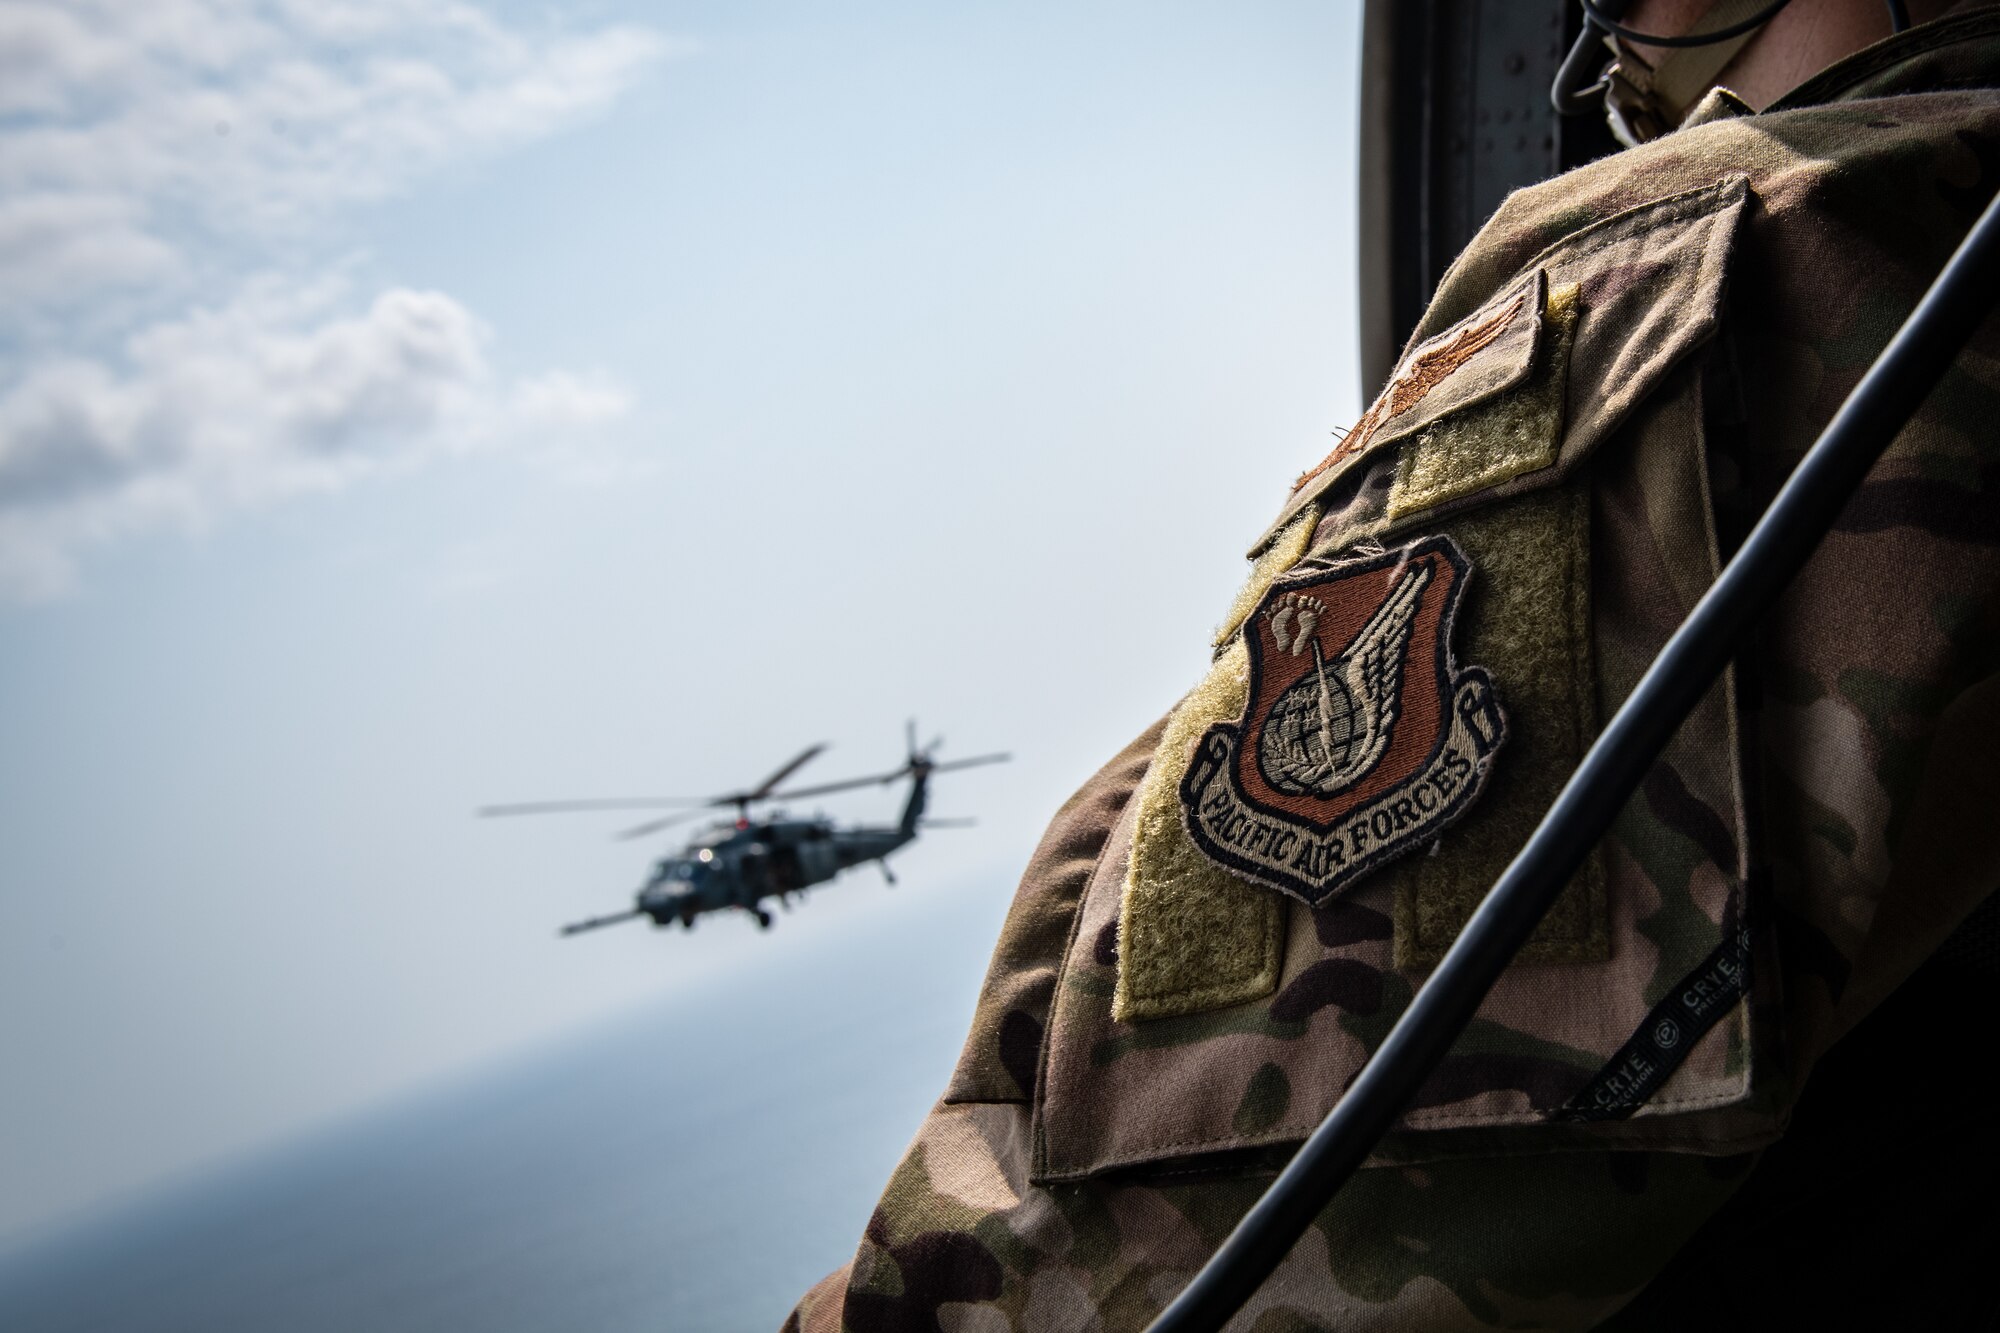 A U.S. Pacific Air Force patch on a uniform is in focus in the foreground while a helicopter flies over the water in the background slightly out of focus.